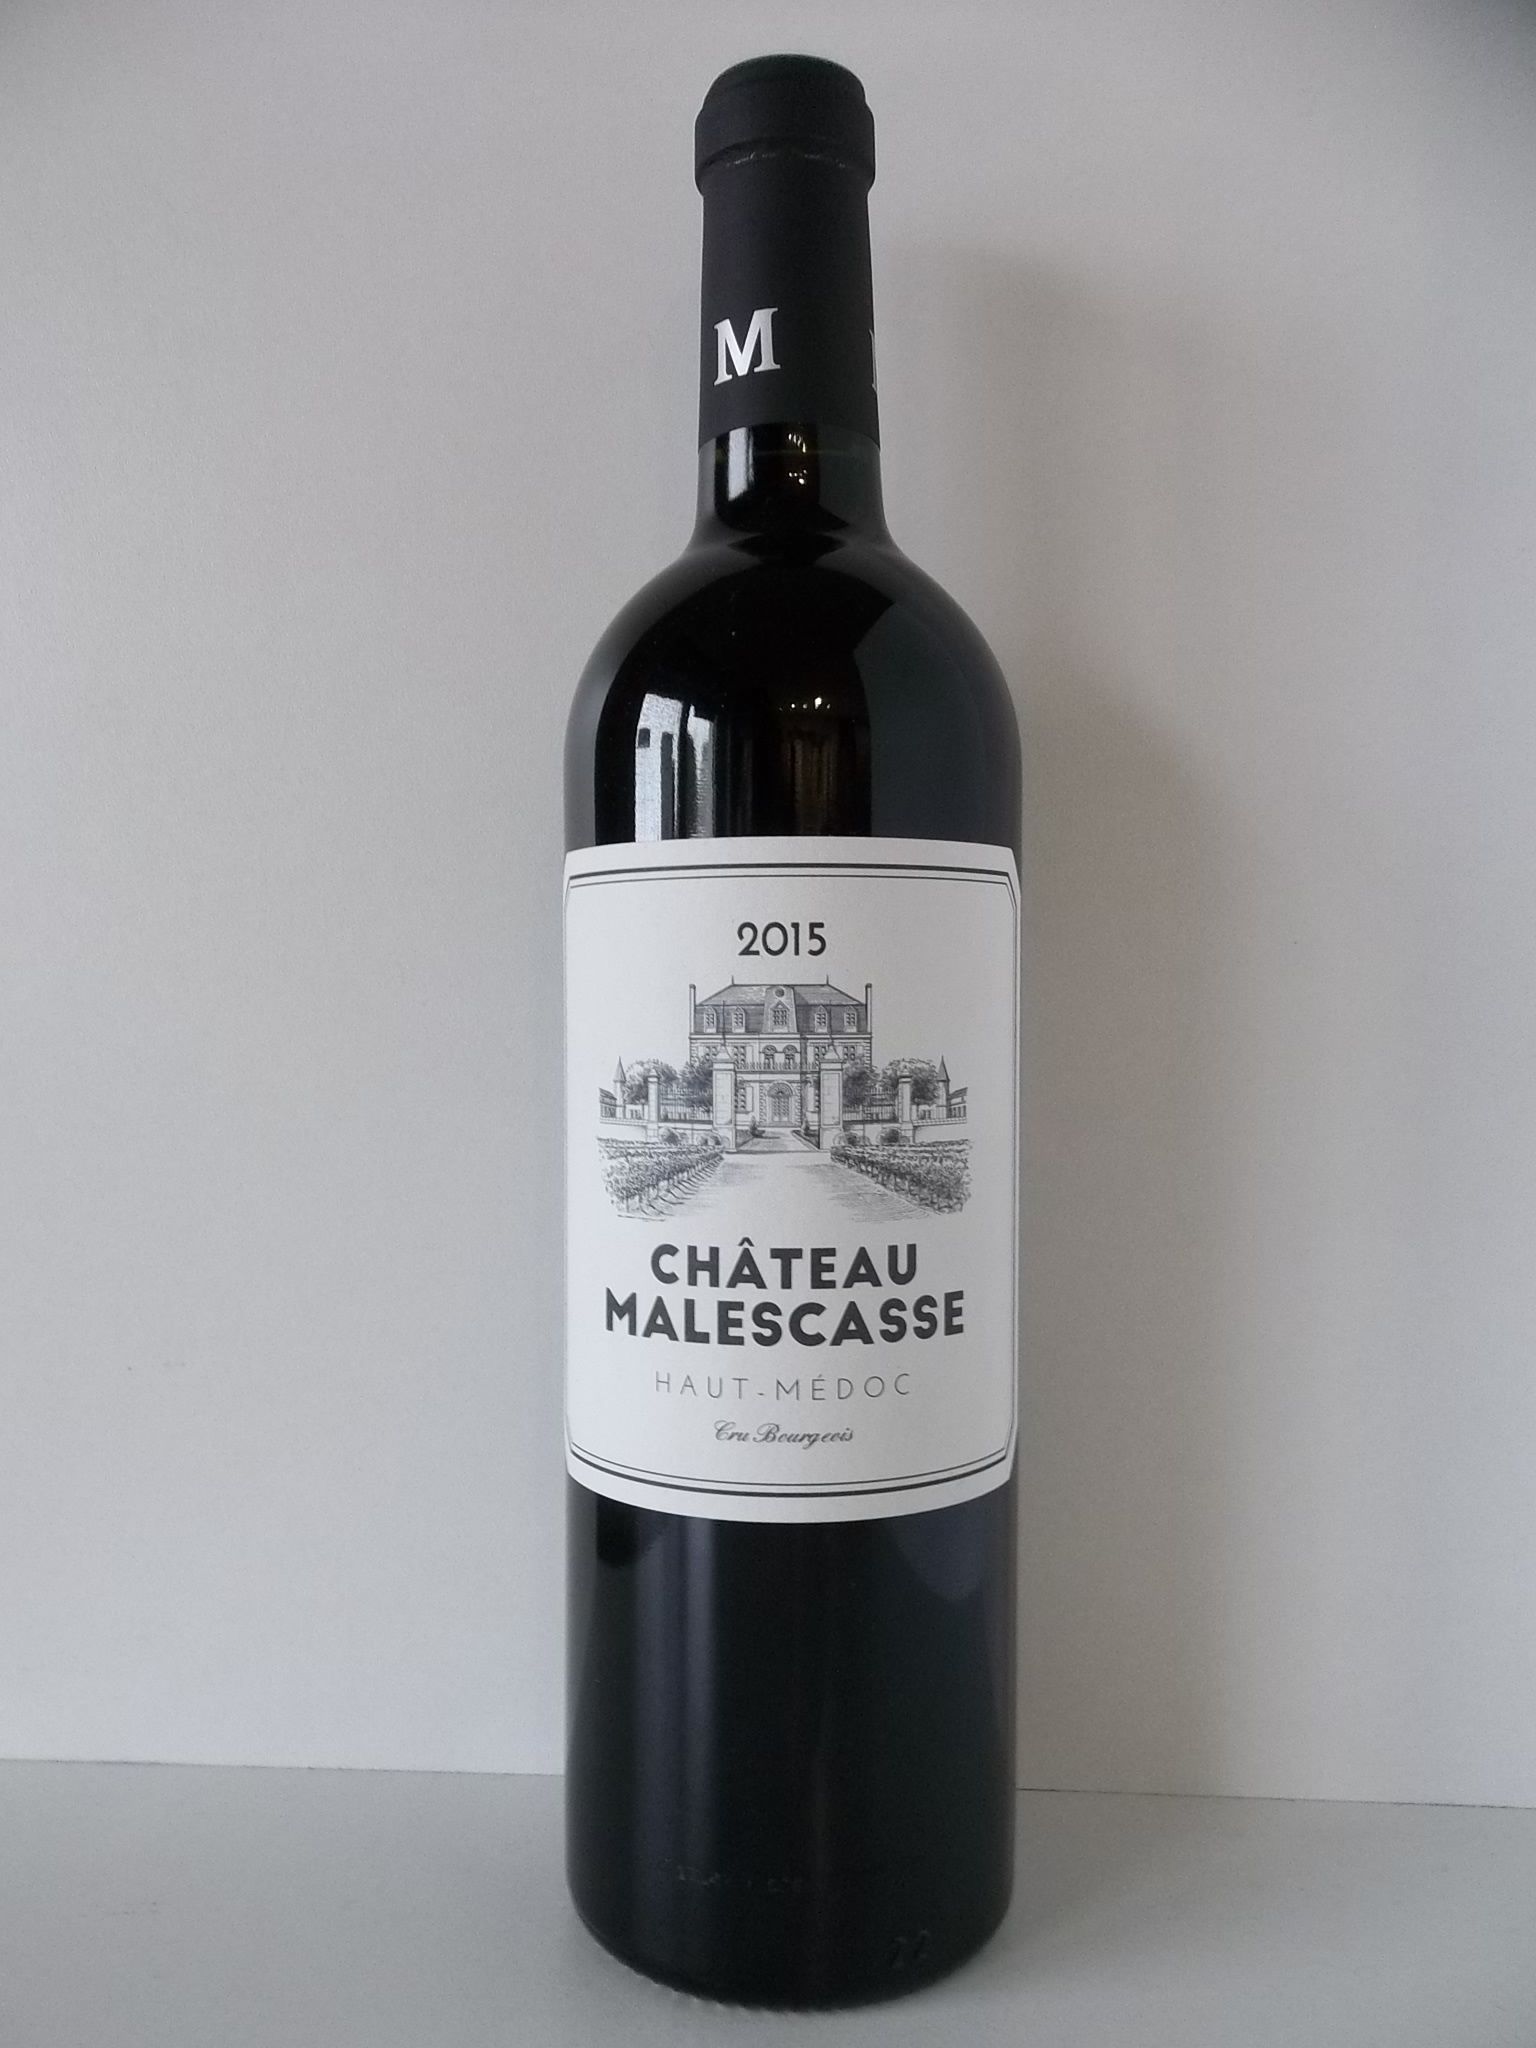 Haut-Medoc-Cru-Bourgeois-Chateau-MALESCASSE-2015-75cl-42-735748187.JPG